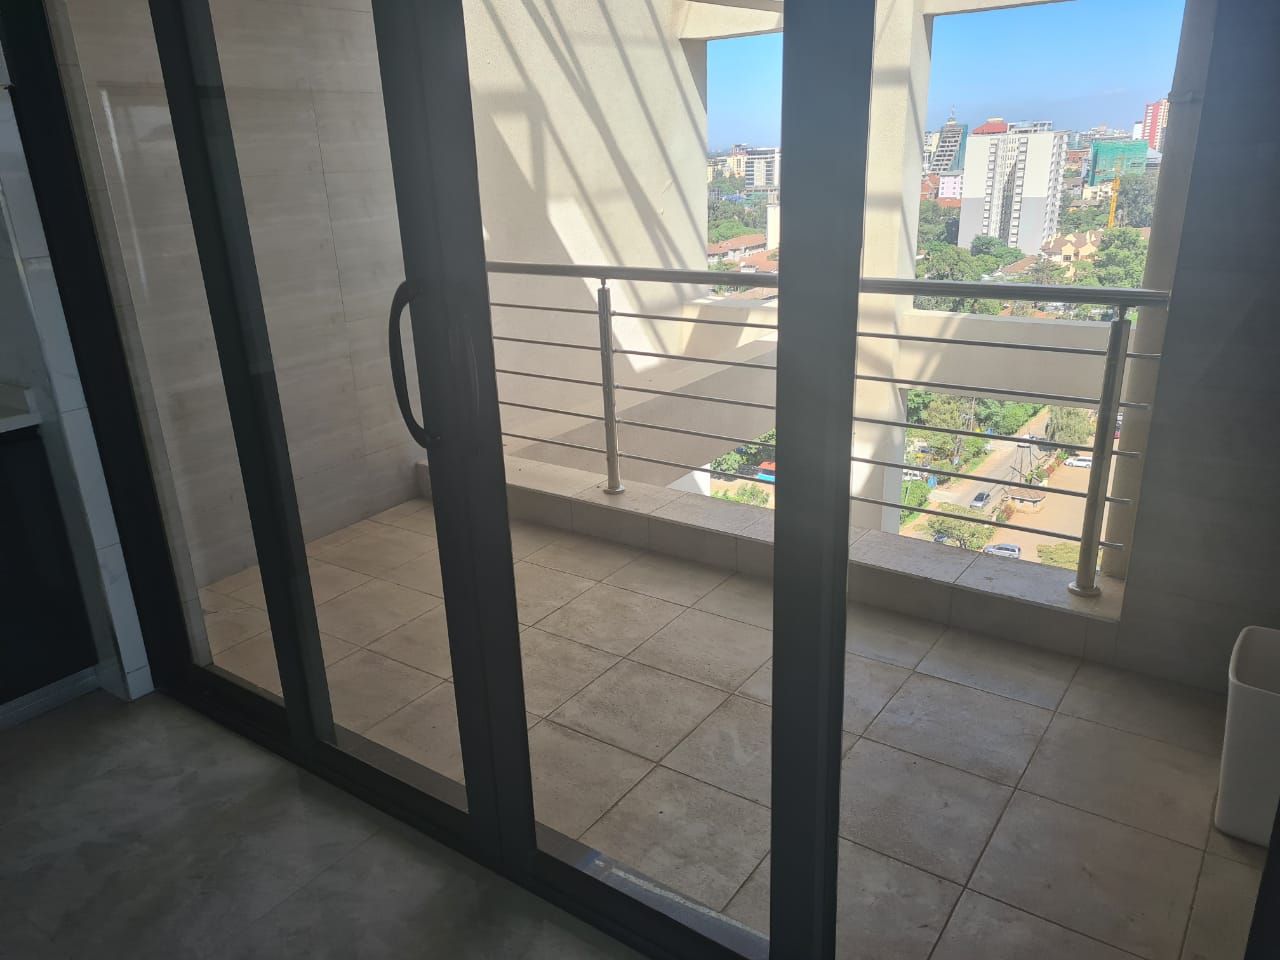 Luxury Penthouse for Sale in Kilimani with 5 Bedroom All En-suite at KSH36M24